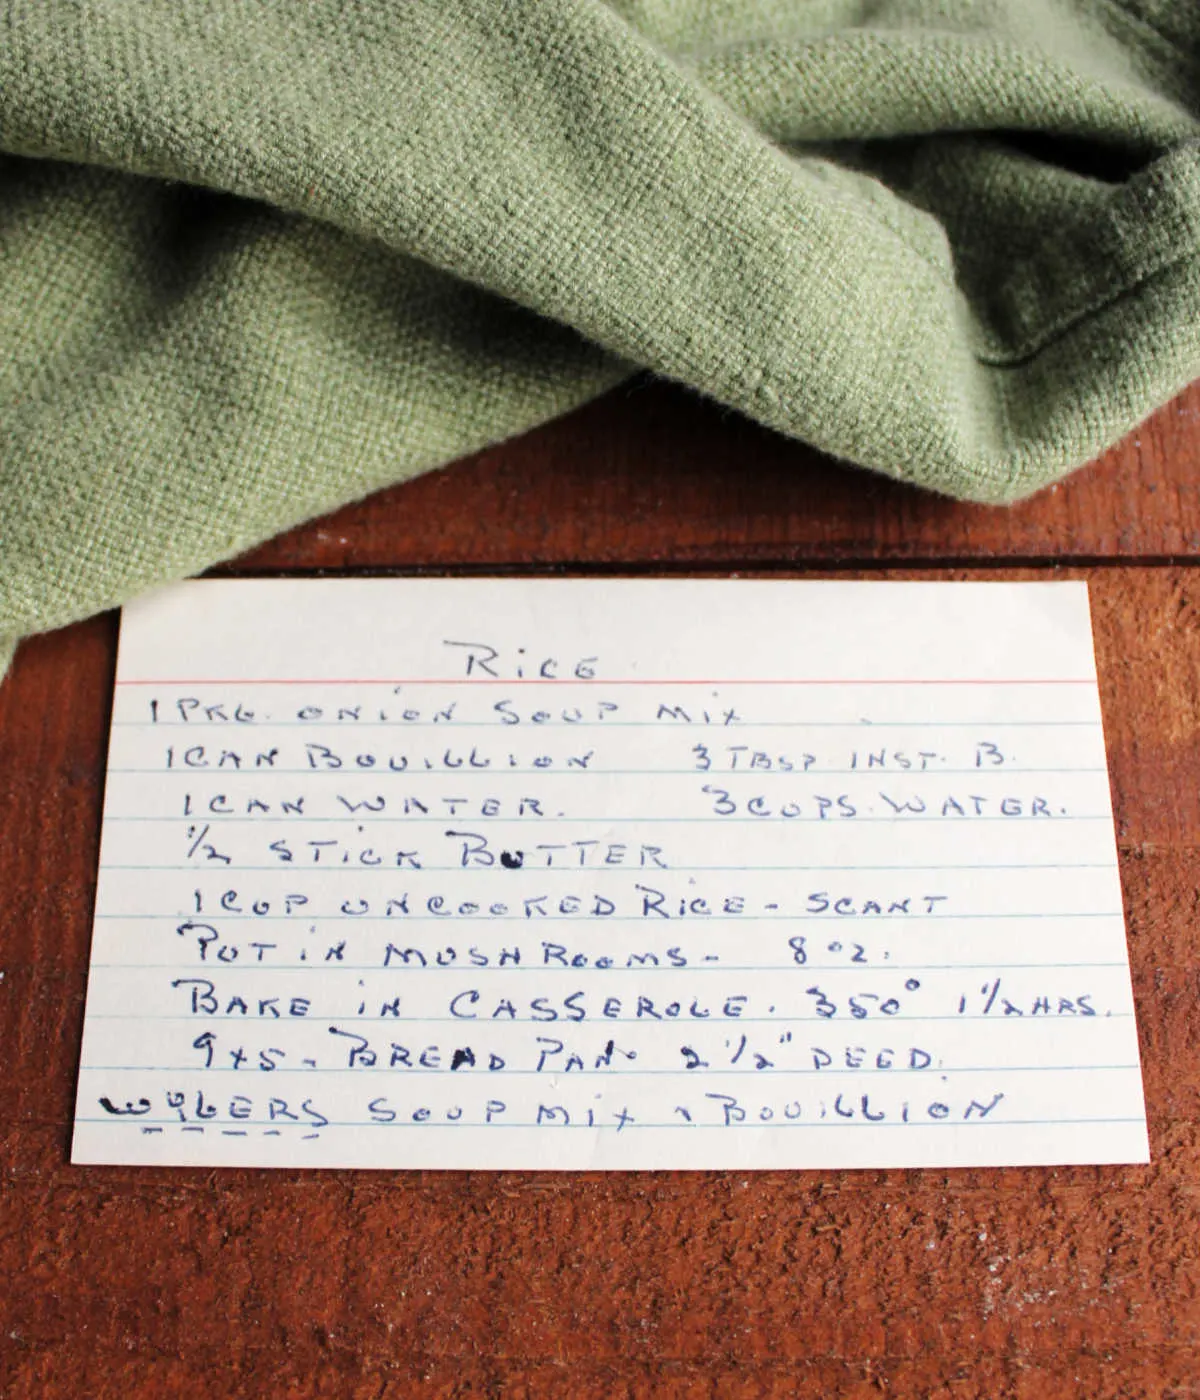 Slightly yellowed index card with hand written recipe for "rice" on it.